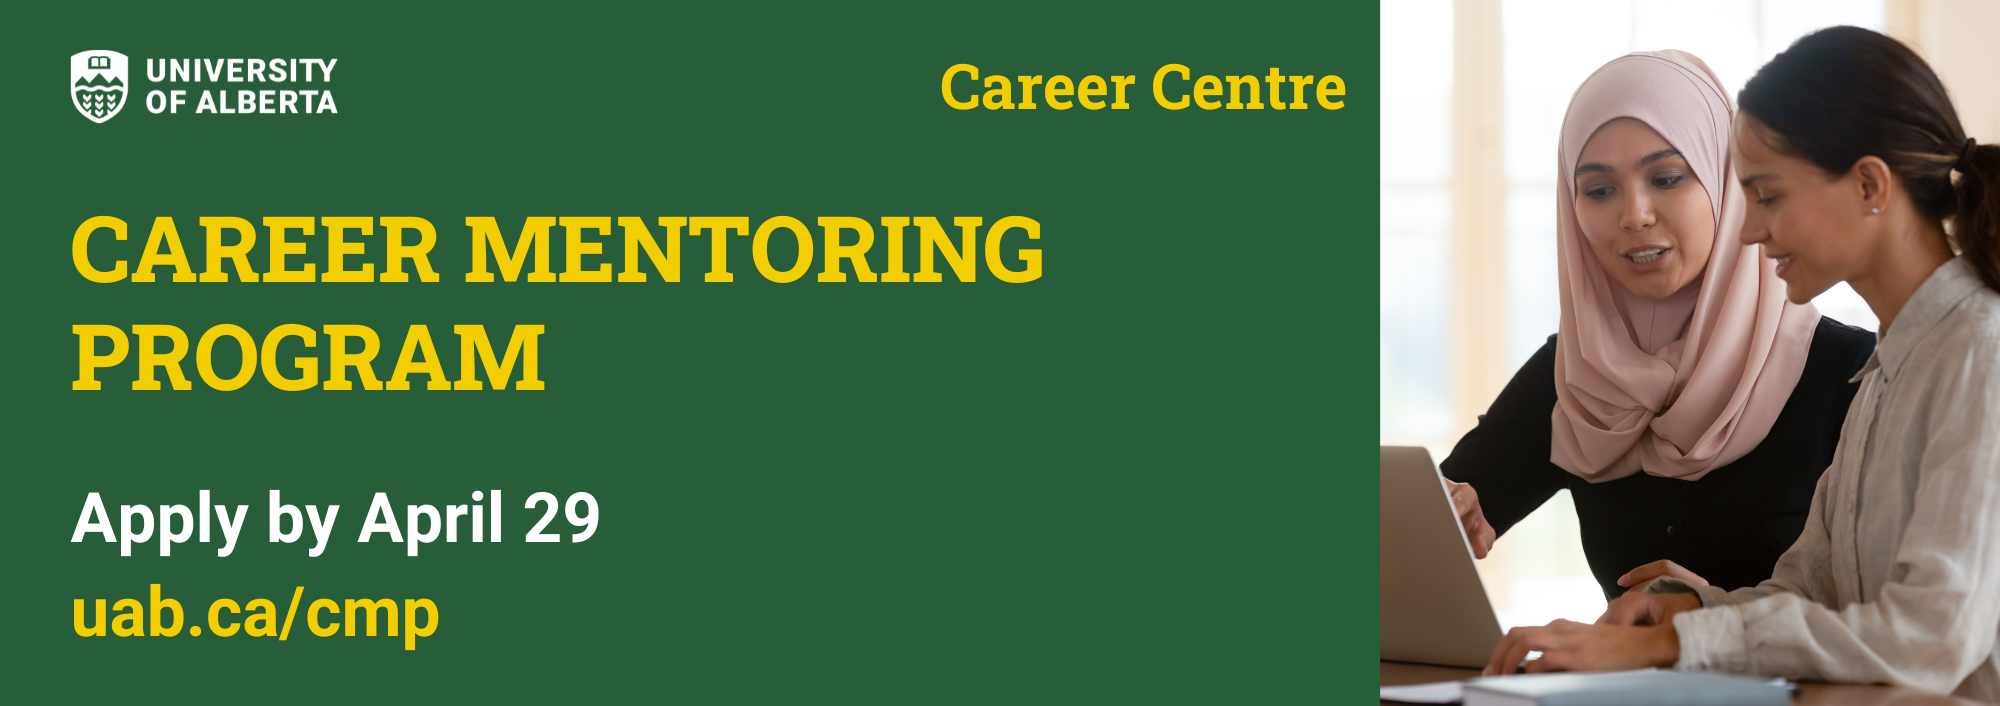 Career Mentoring Program. Two young women, one in a headscarf, talk to each other over a computer. Apply by April 29. uab.ca/cmp